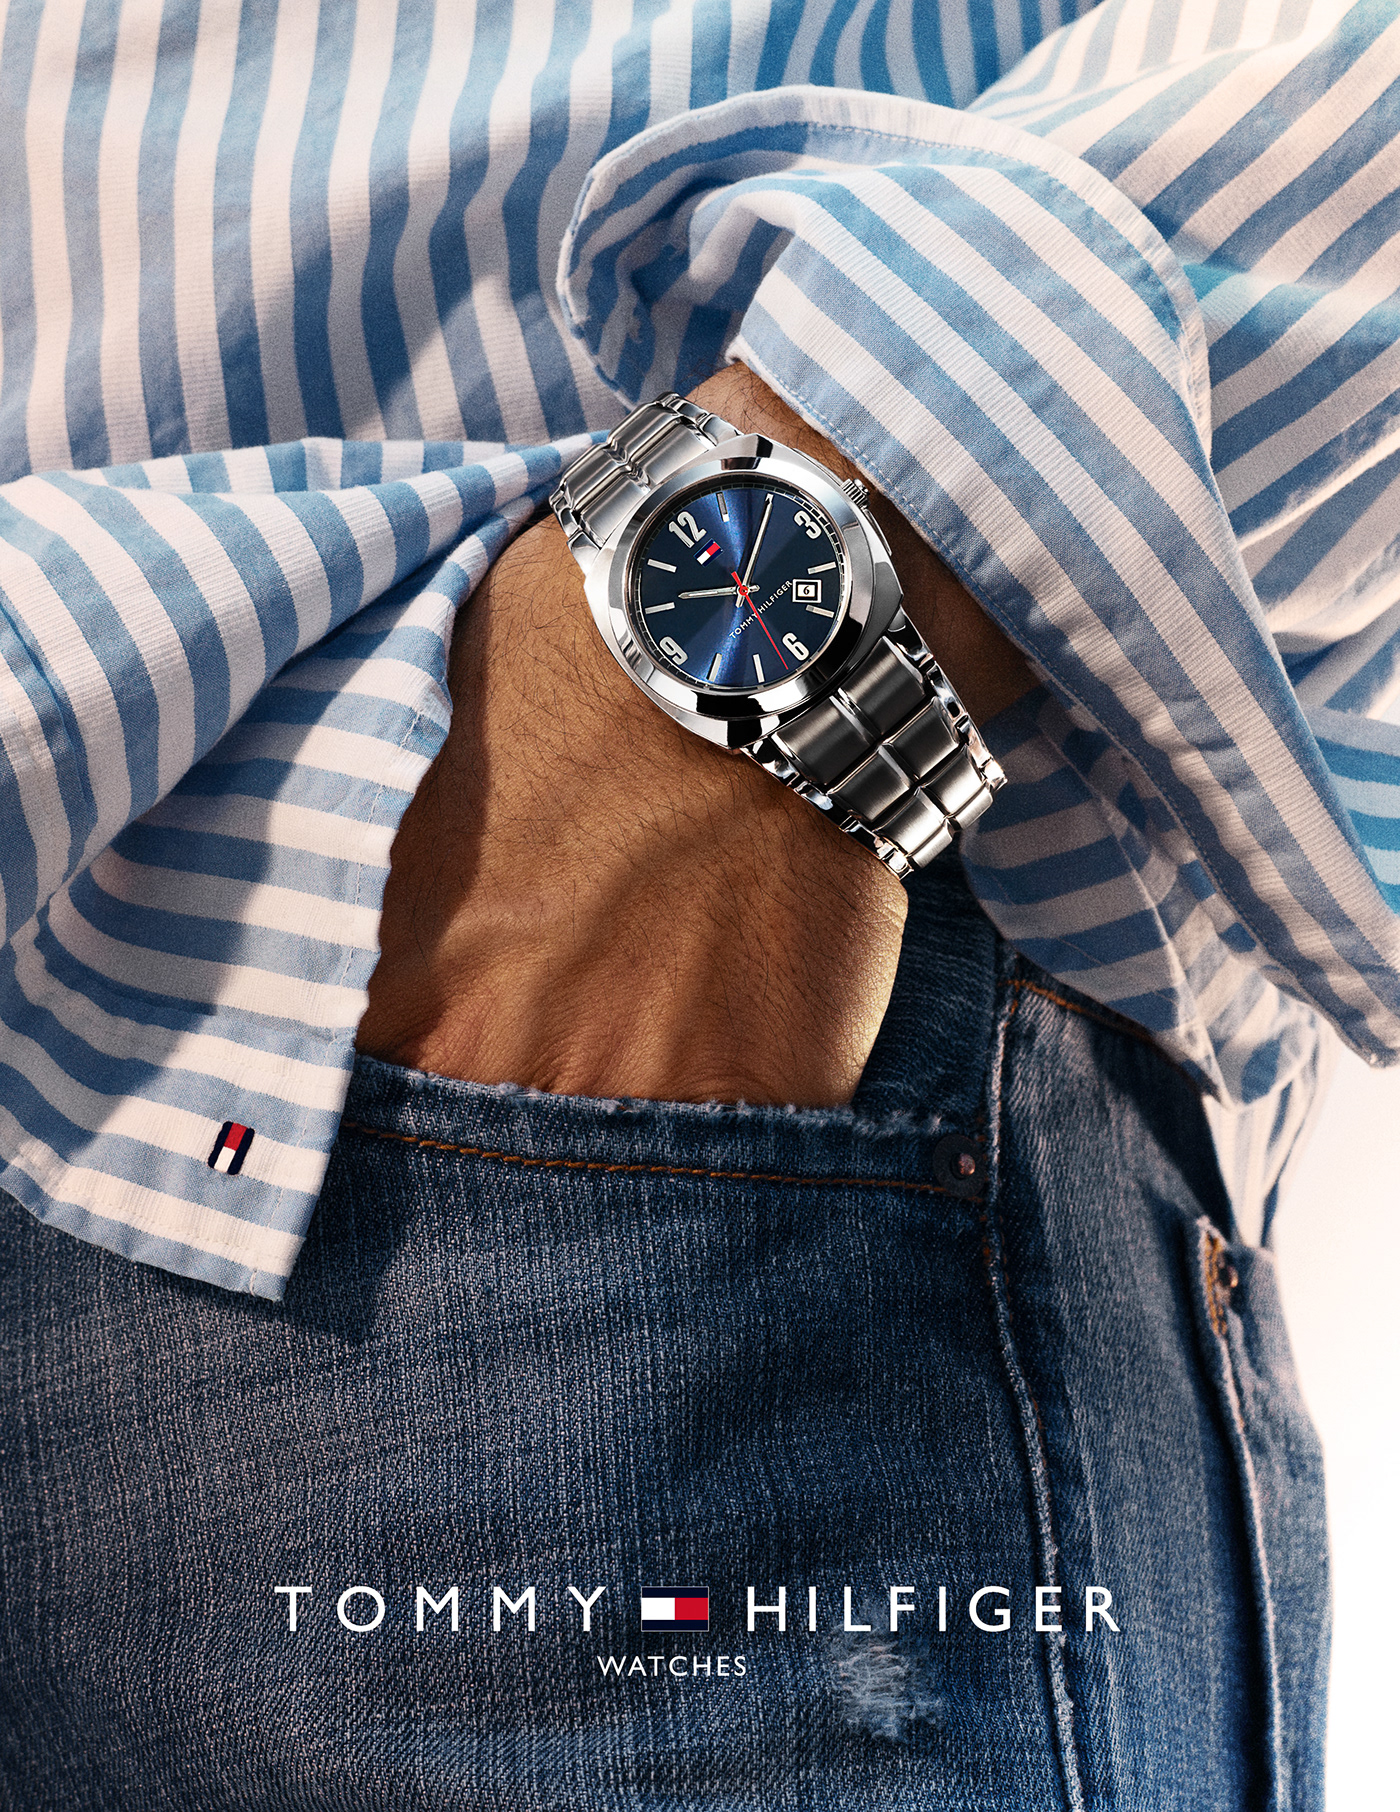 Watch and timepiece product photography by commercial and advertising photographer Timothy Hogan